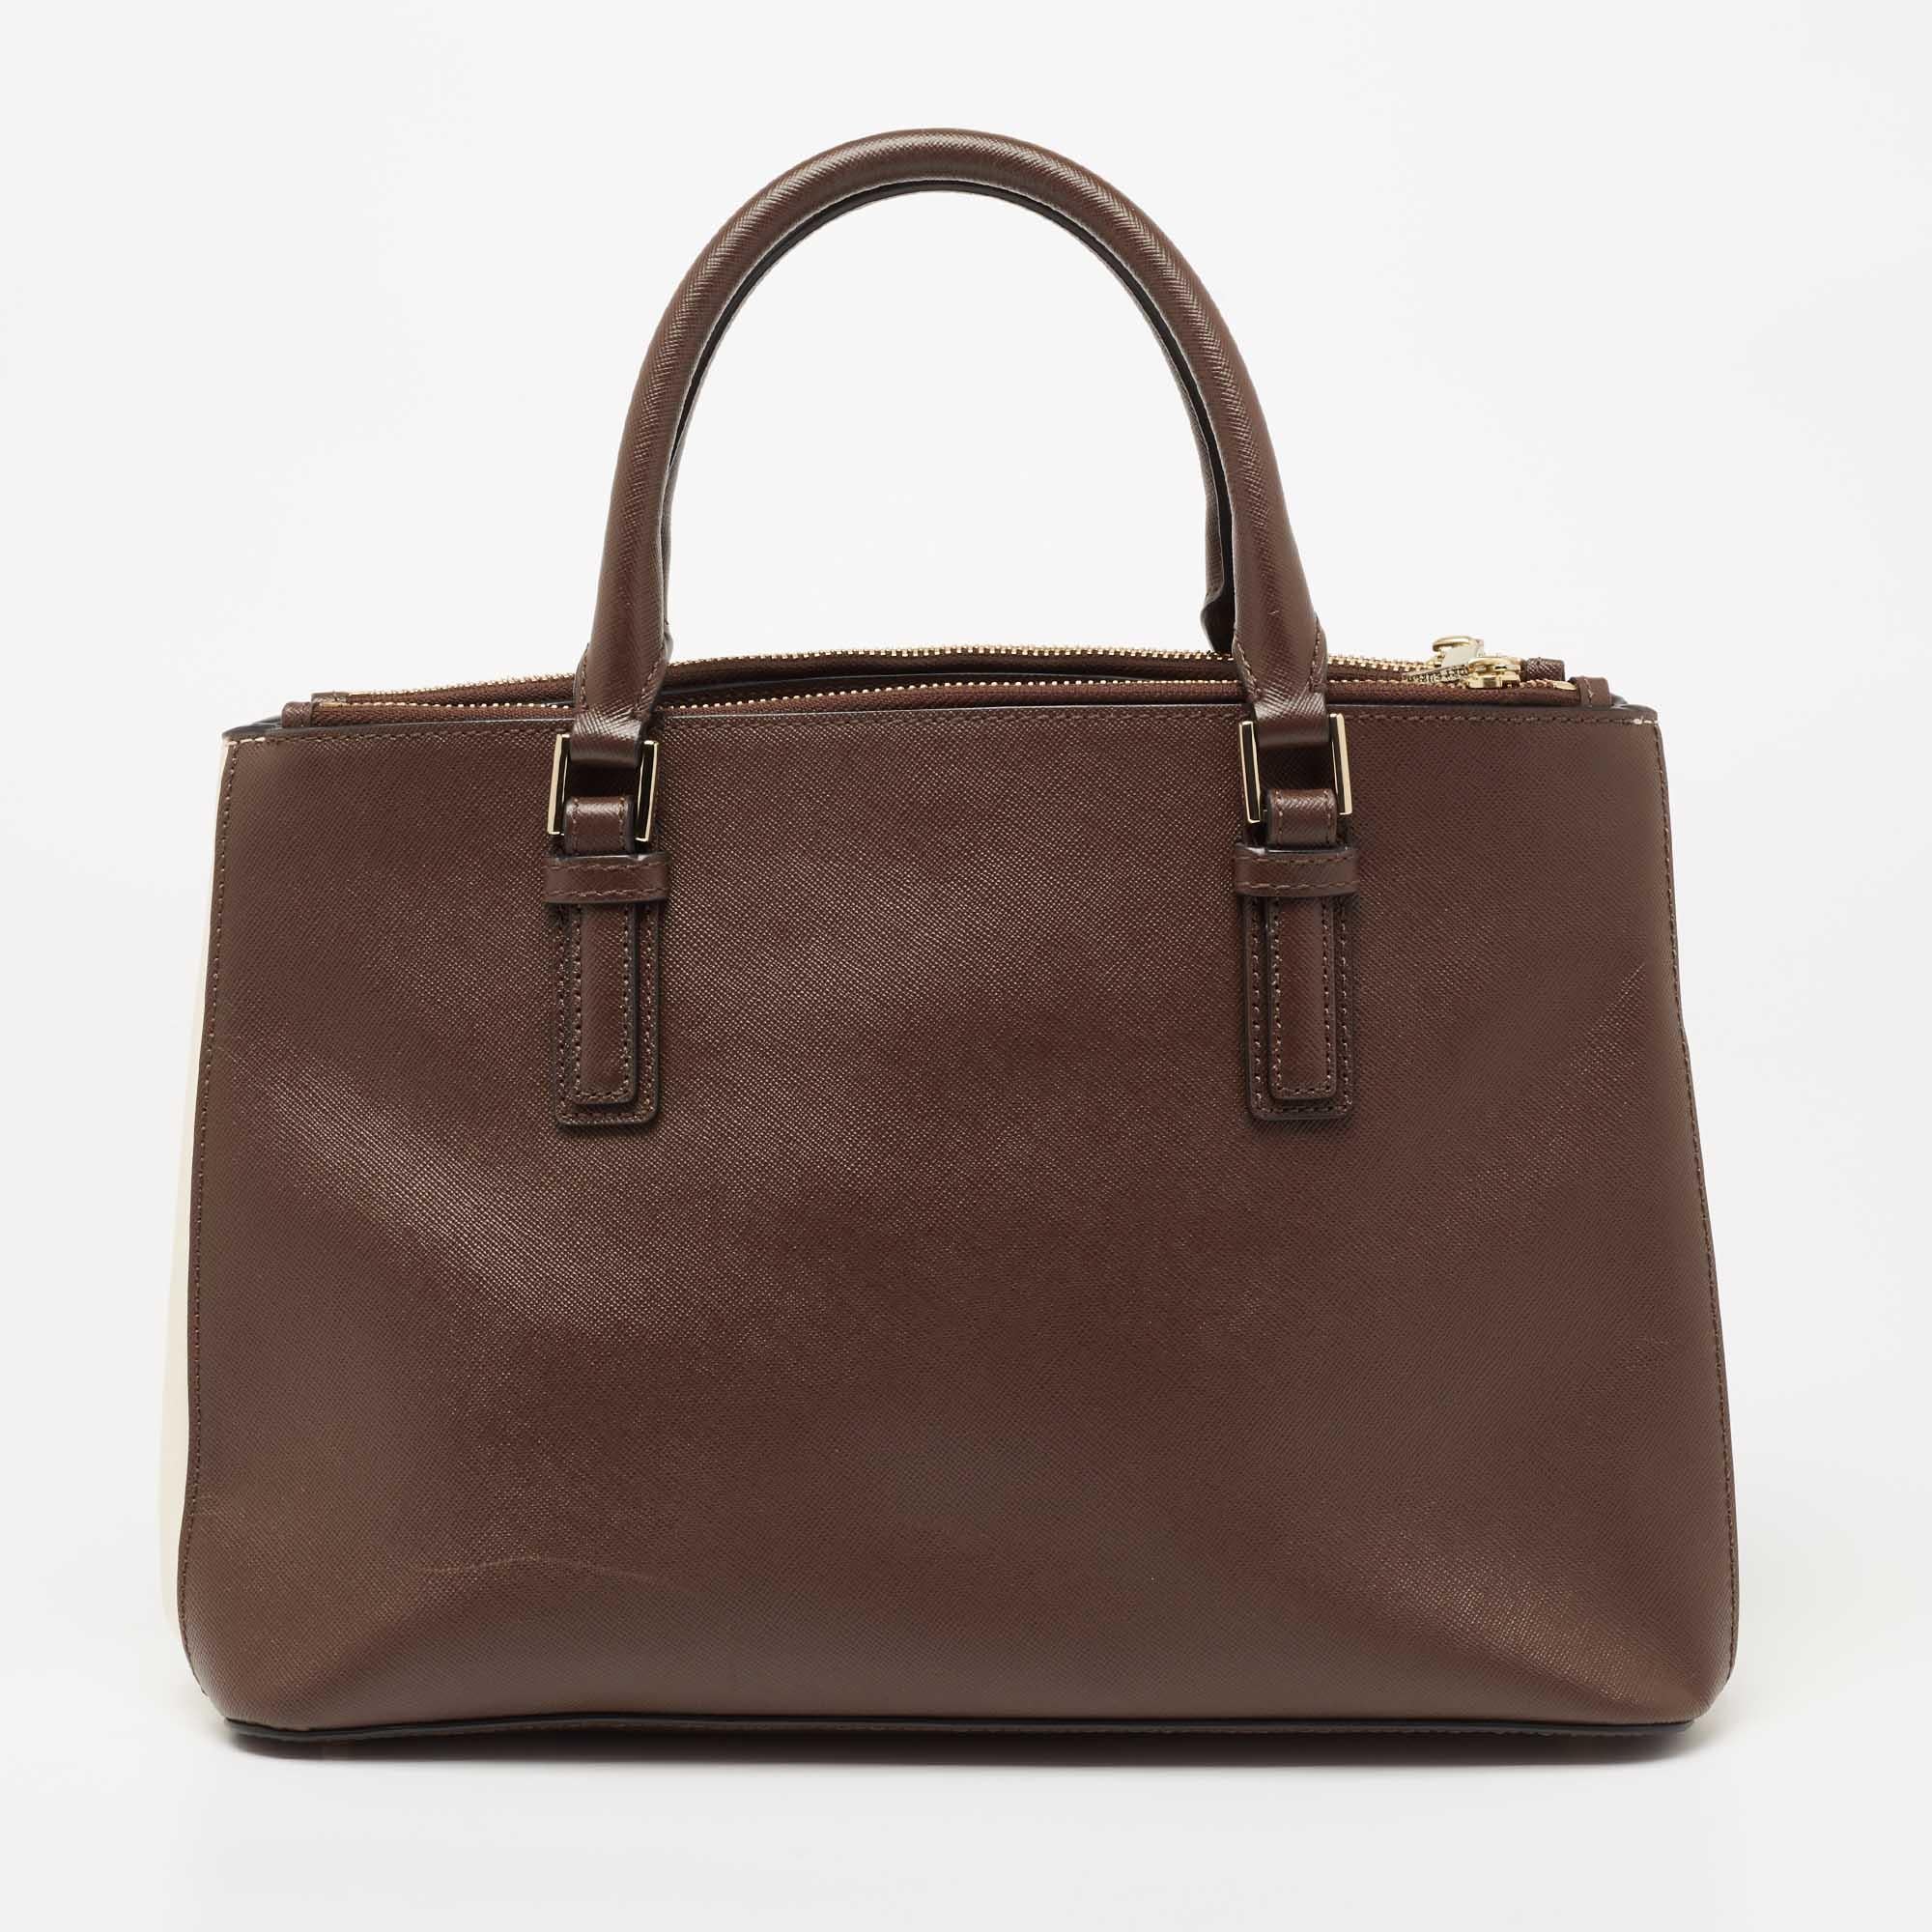 This luxurious Robinson Double Zip tote from Tory Burch will surely meet all your handbag expectations! It is made from dark brown and white Saffiano leather and flaunts a logo accent on the front. It has a chic silhouette that is supported by dual